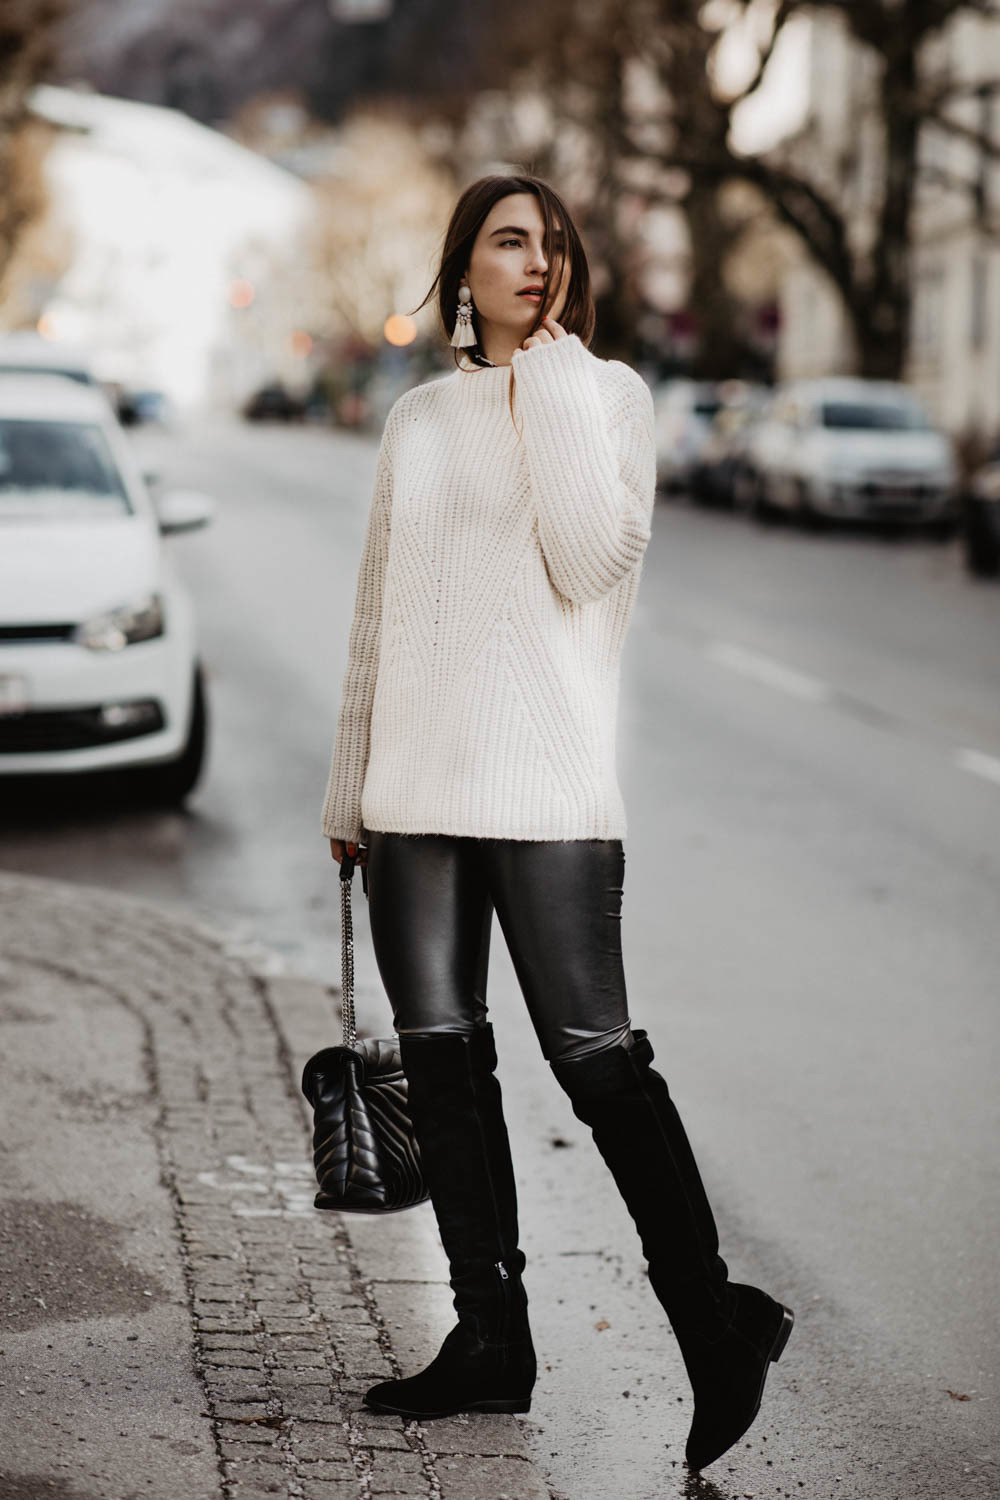 Oversized Cardigan With Leggings and Leather Boots